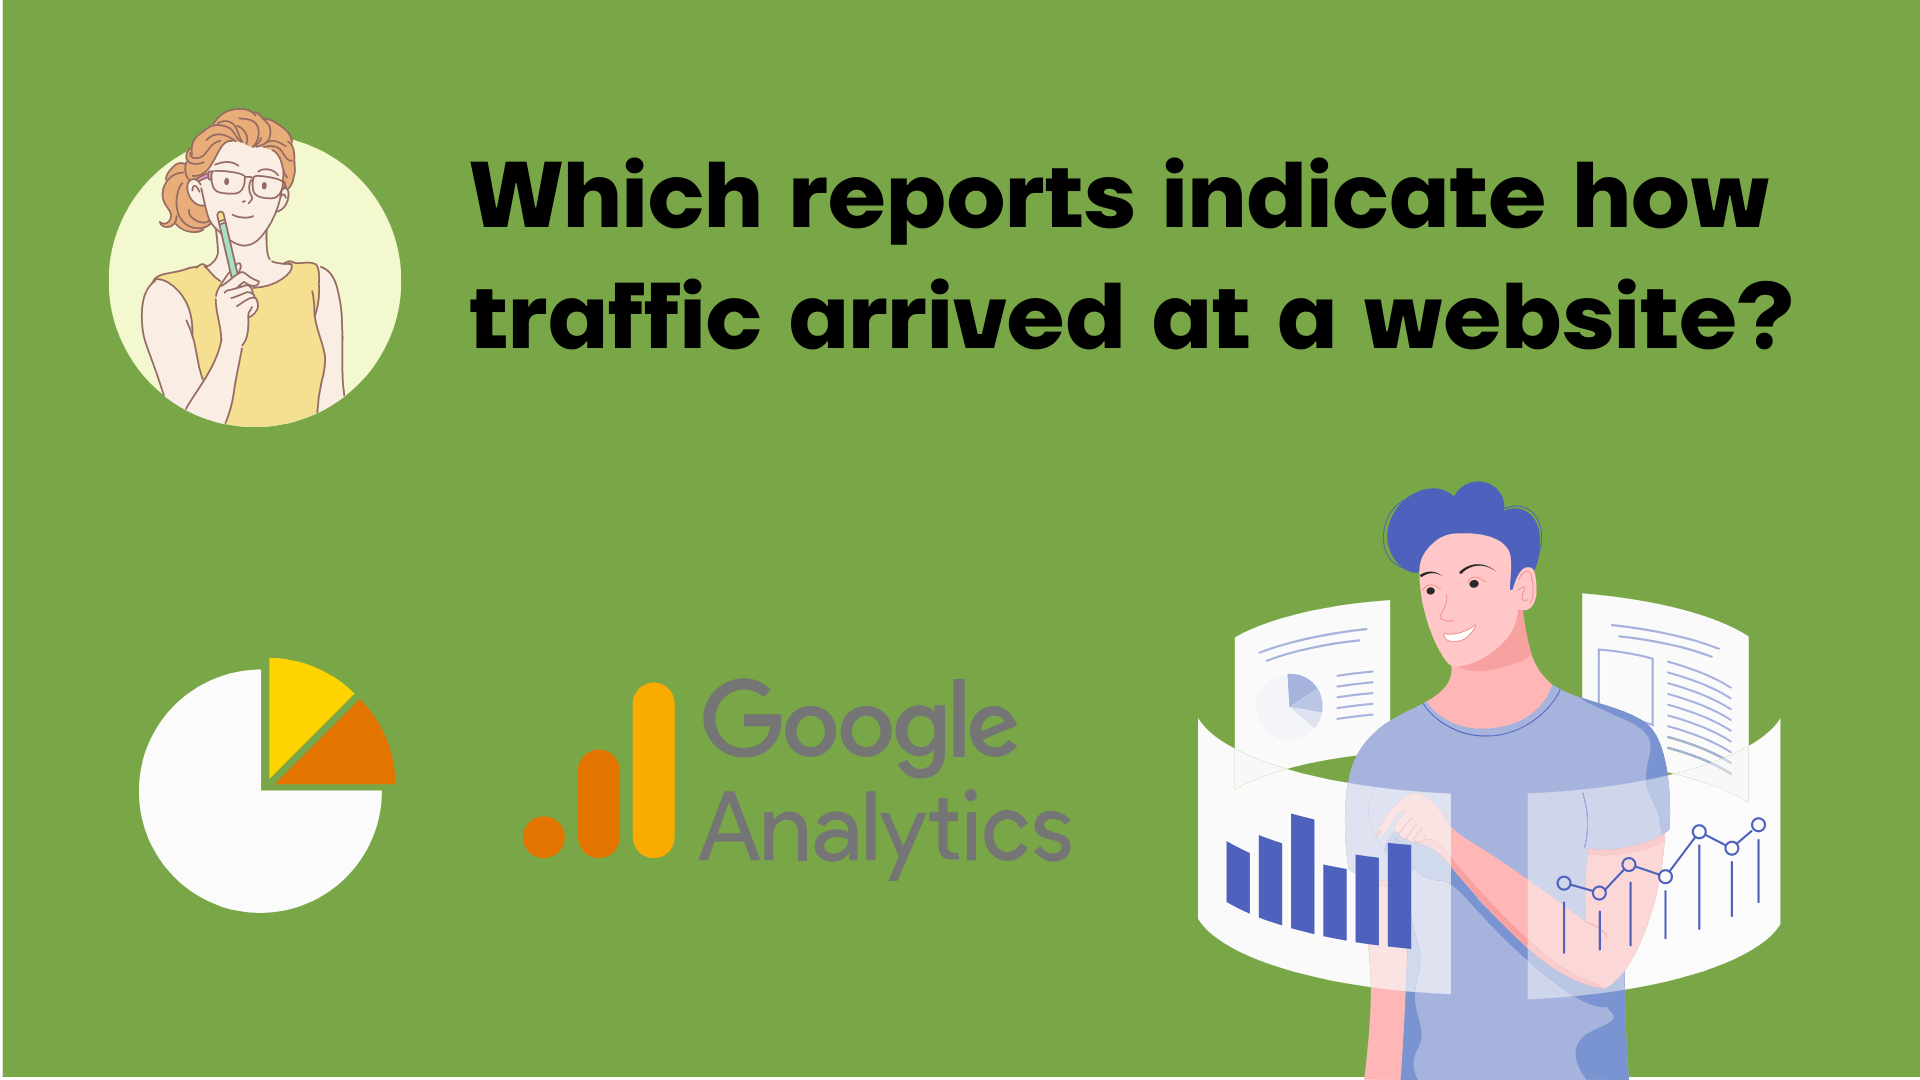 Which reports indicate how traffic arrived at a website